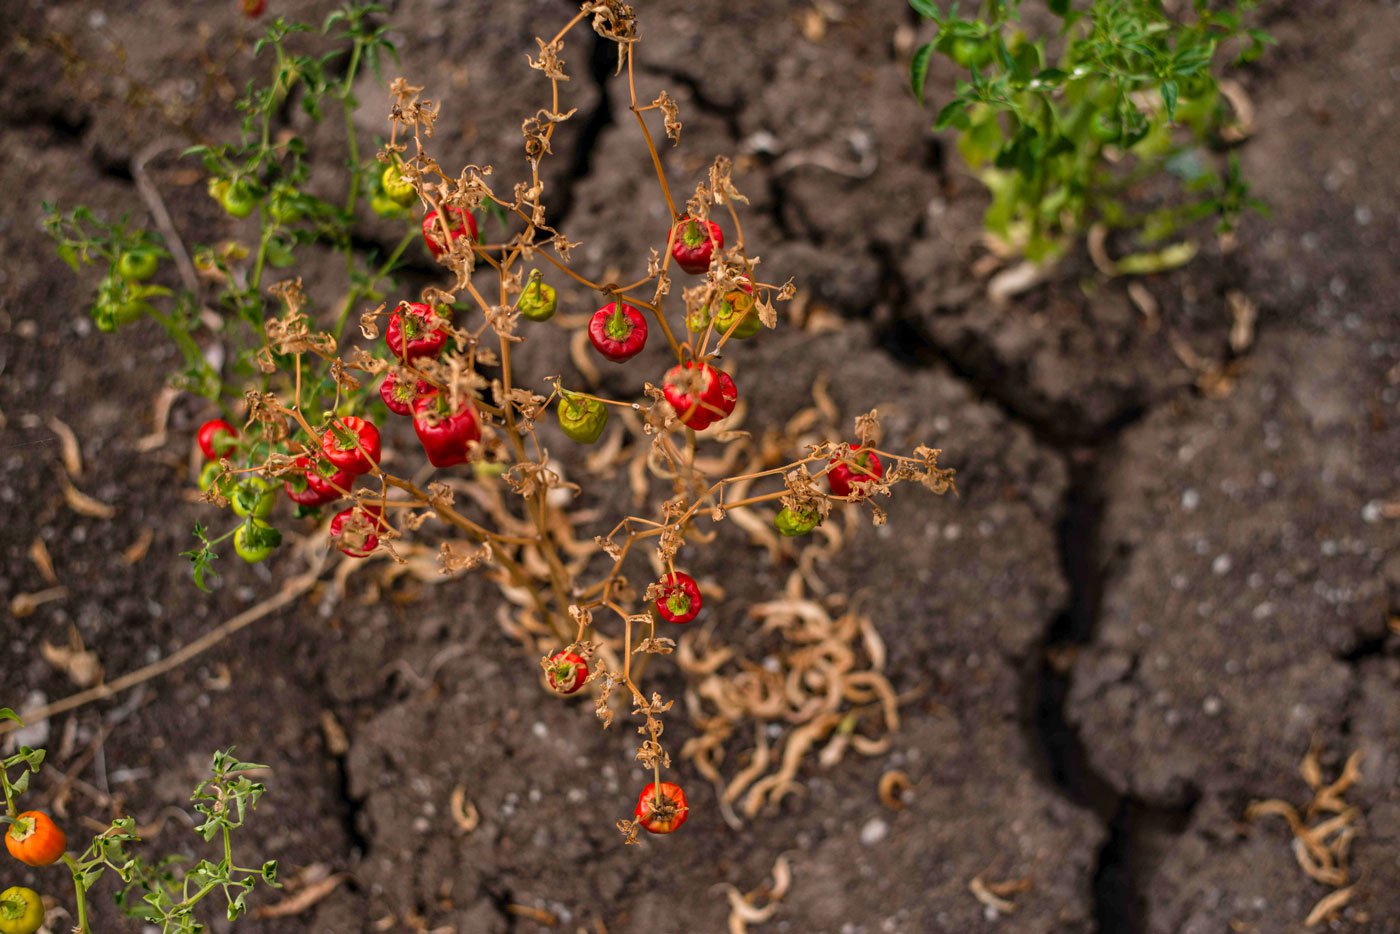 A dried up chilli plant and the cracked earth of Ramanathapuram